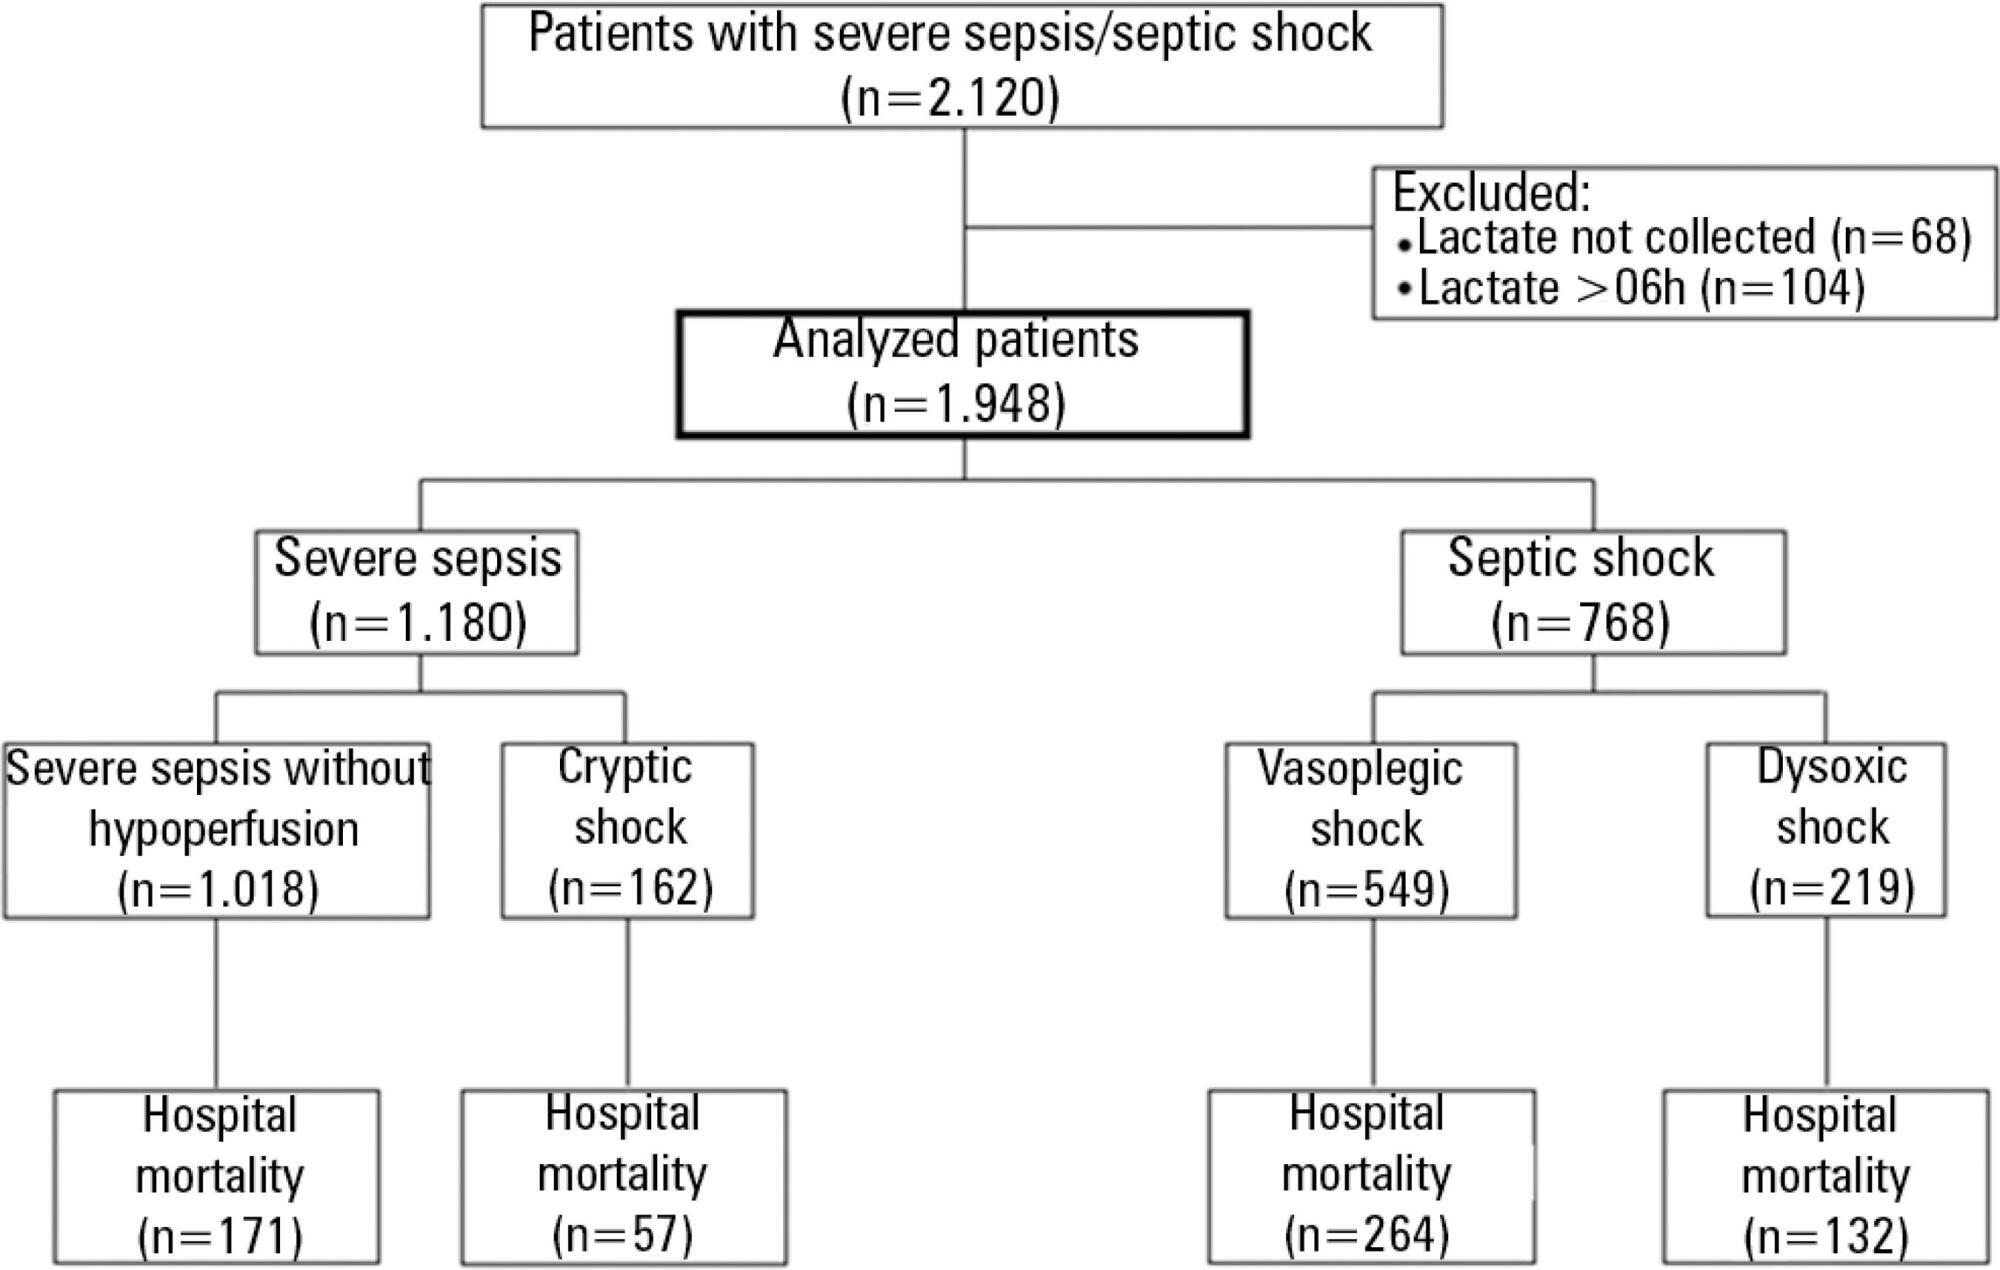 Reclassifying the spectrum of septic patients using
               lactate: severe sepsis, cryptic shock, vasoplegic shock and dysoxic
               shock